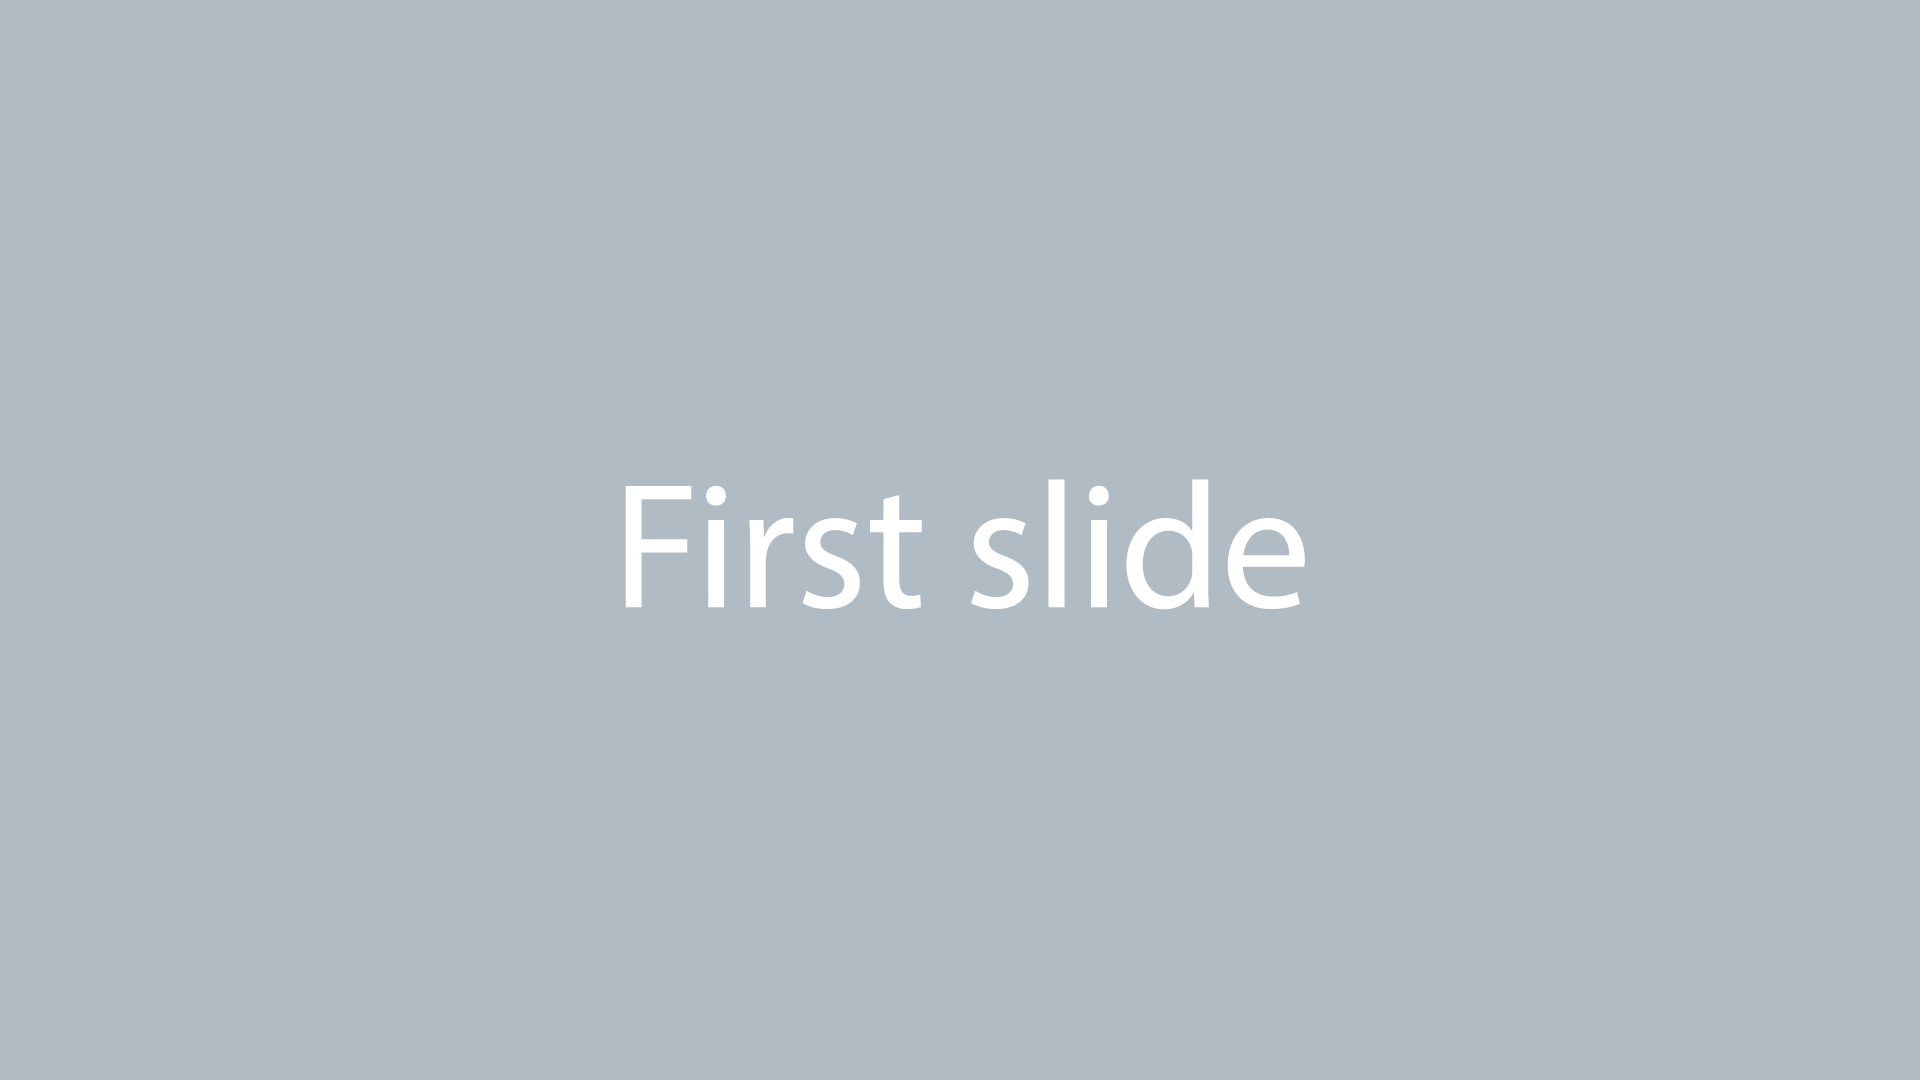 The first slider